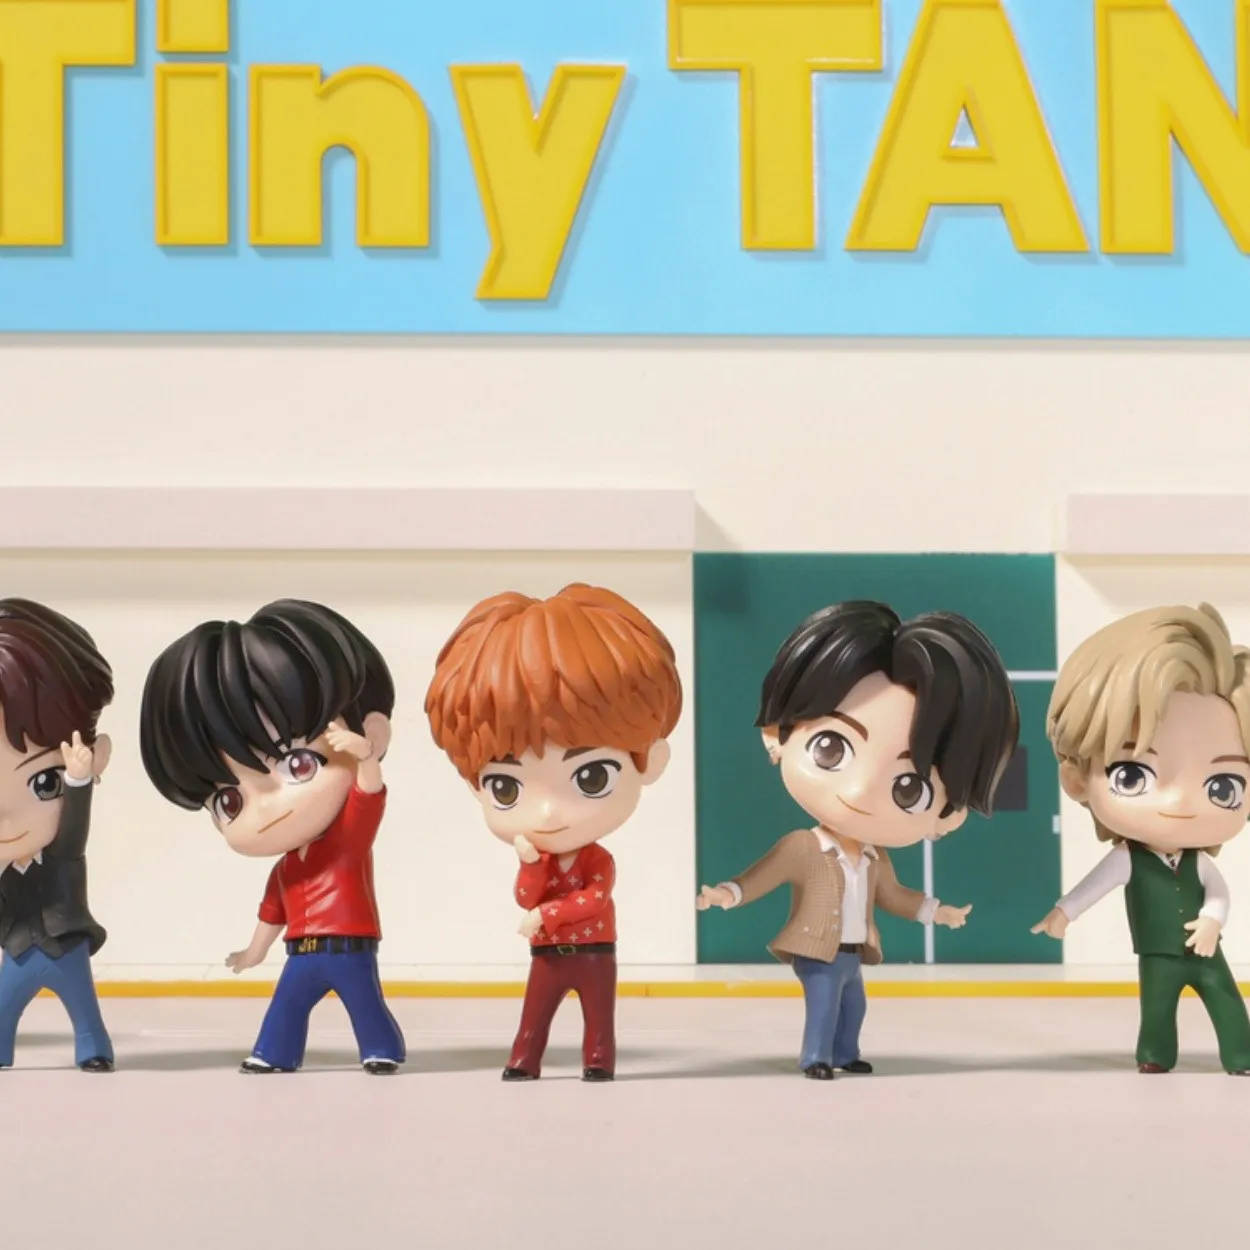 Enchanting Tiny Tan Bts Dolls In Action Background